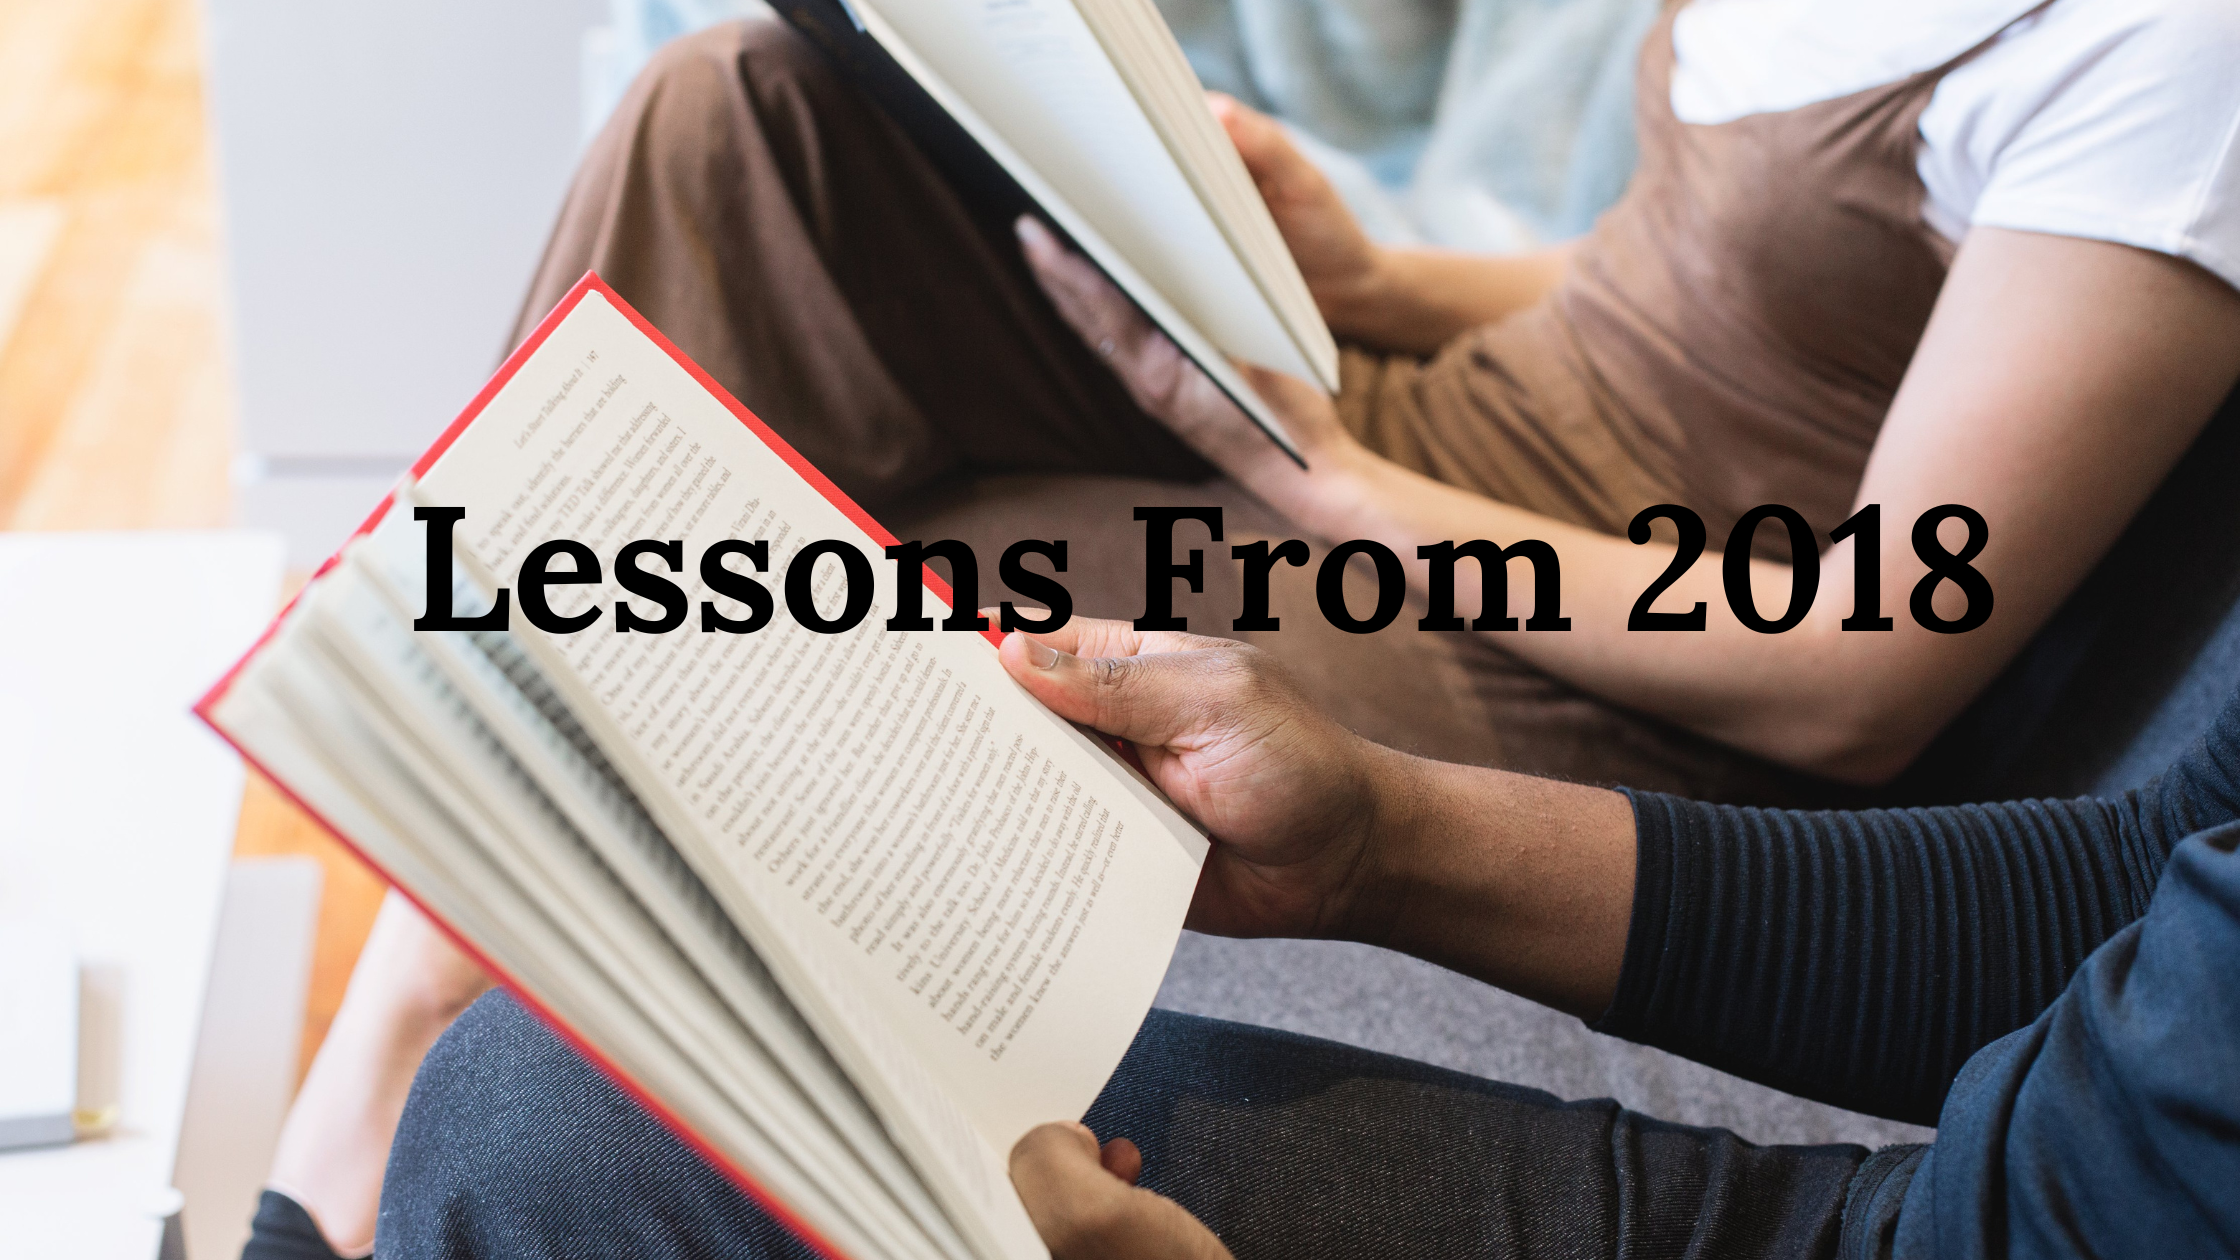 21 lessons from 2018